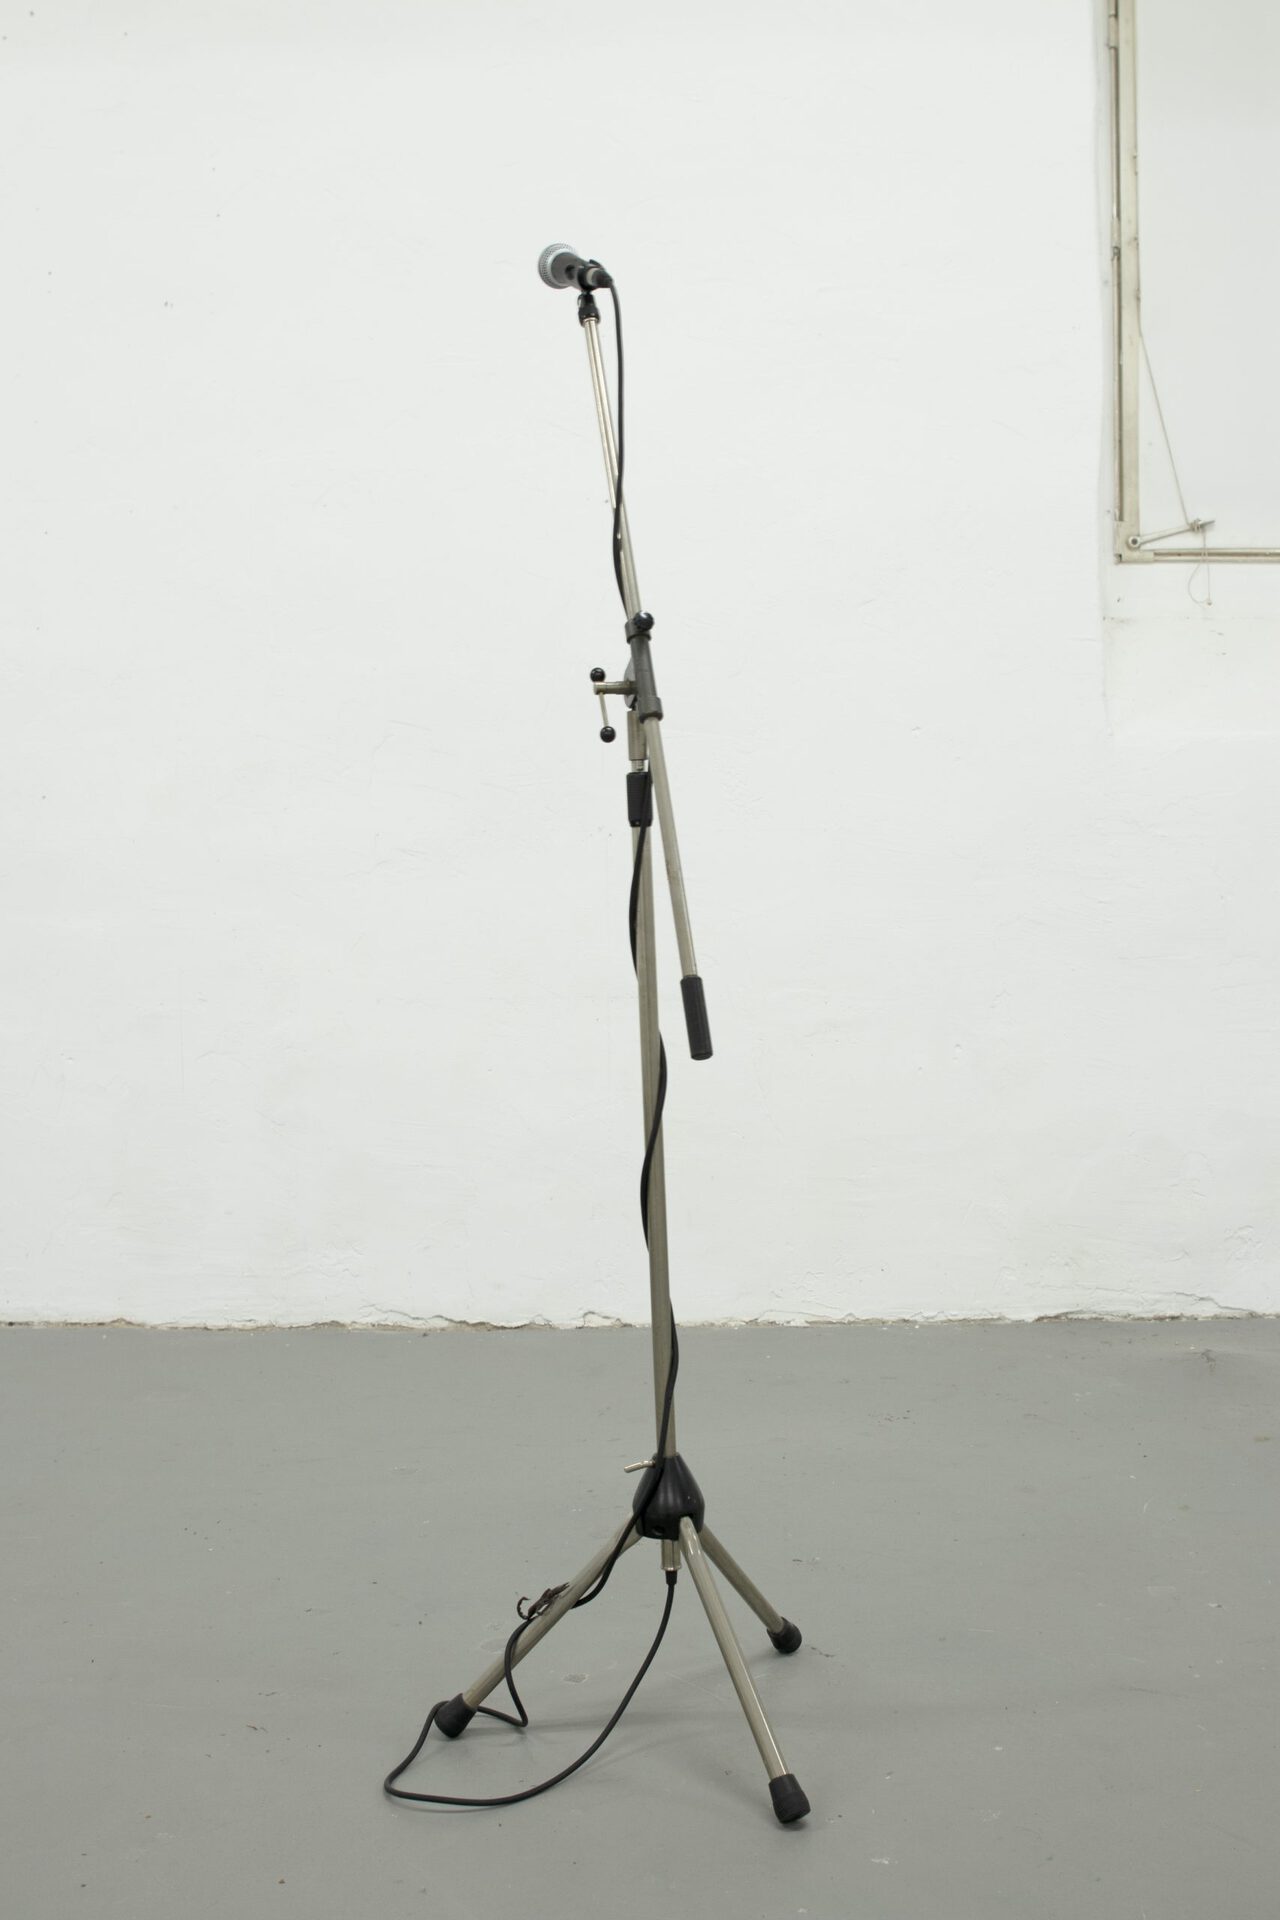 Vincent Scheers, Attention, 2020, Microphone stand, Scorpion